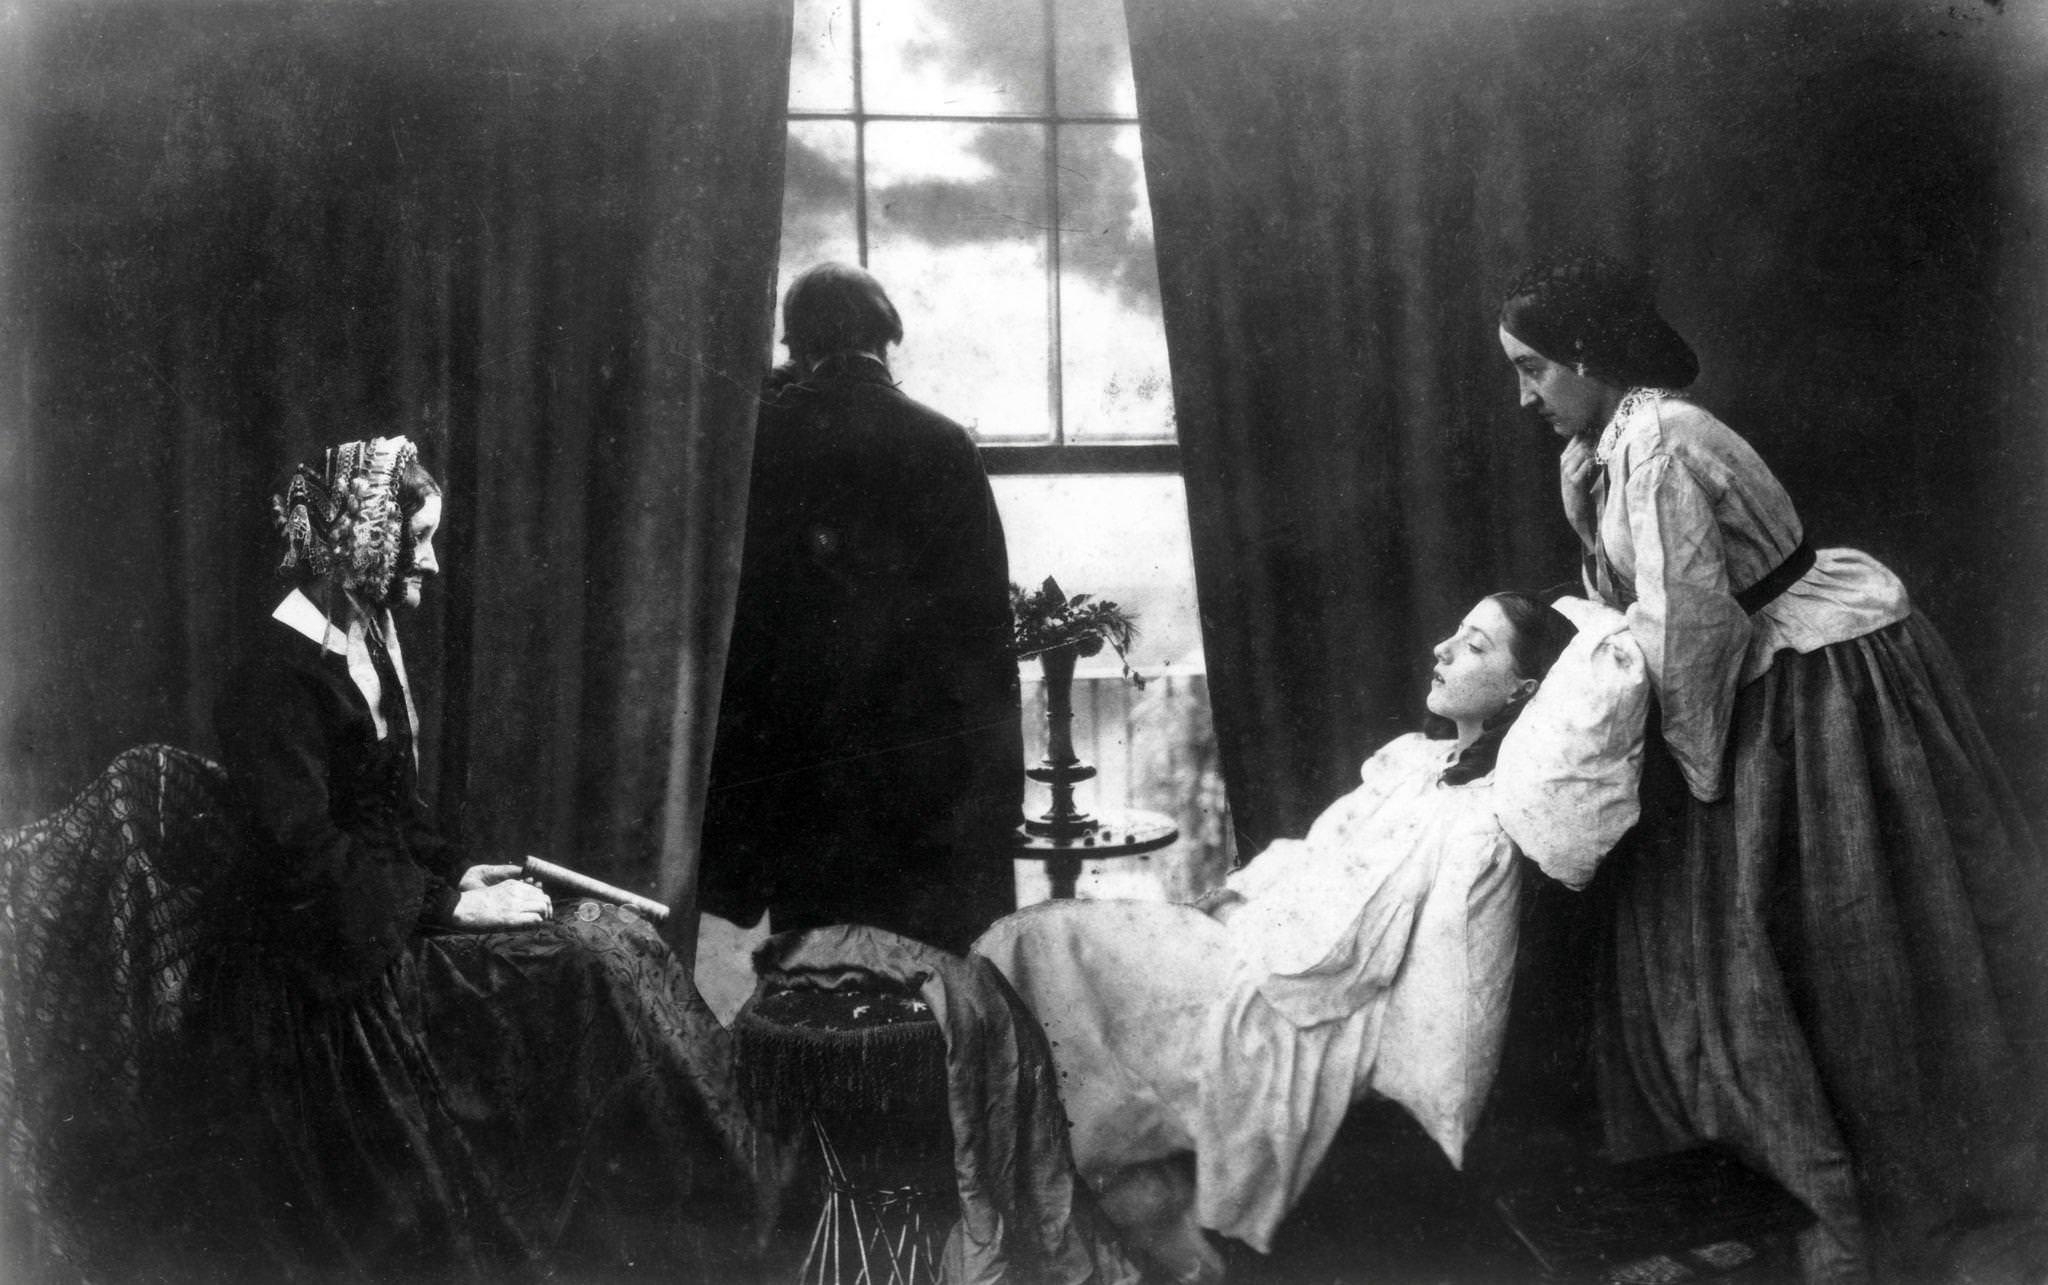 A young girl on her deathbed surrounded by her family, 1860